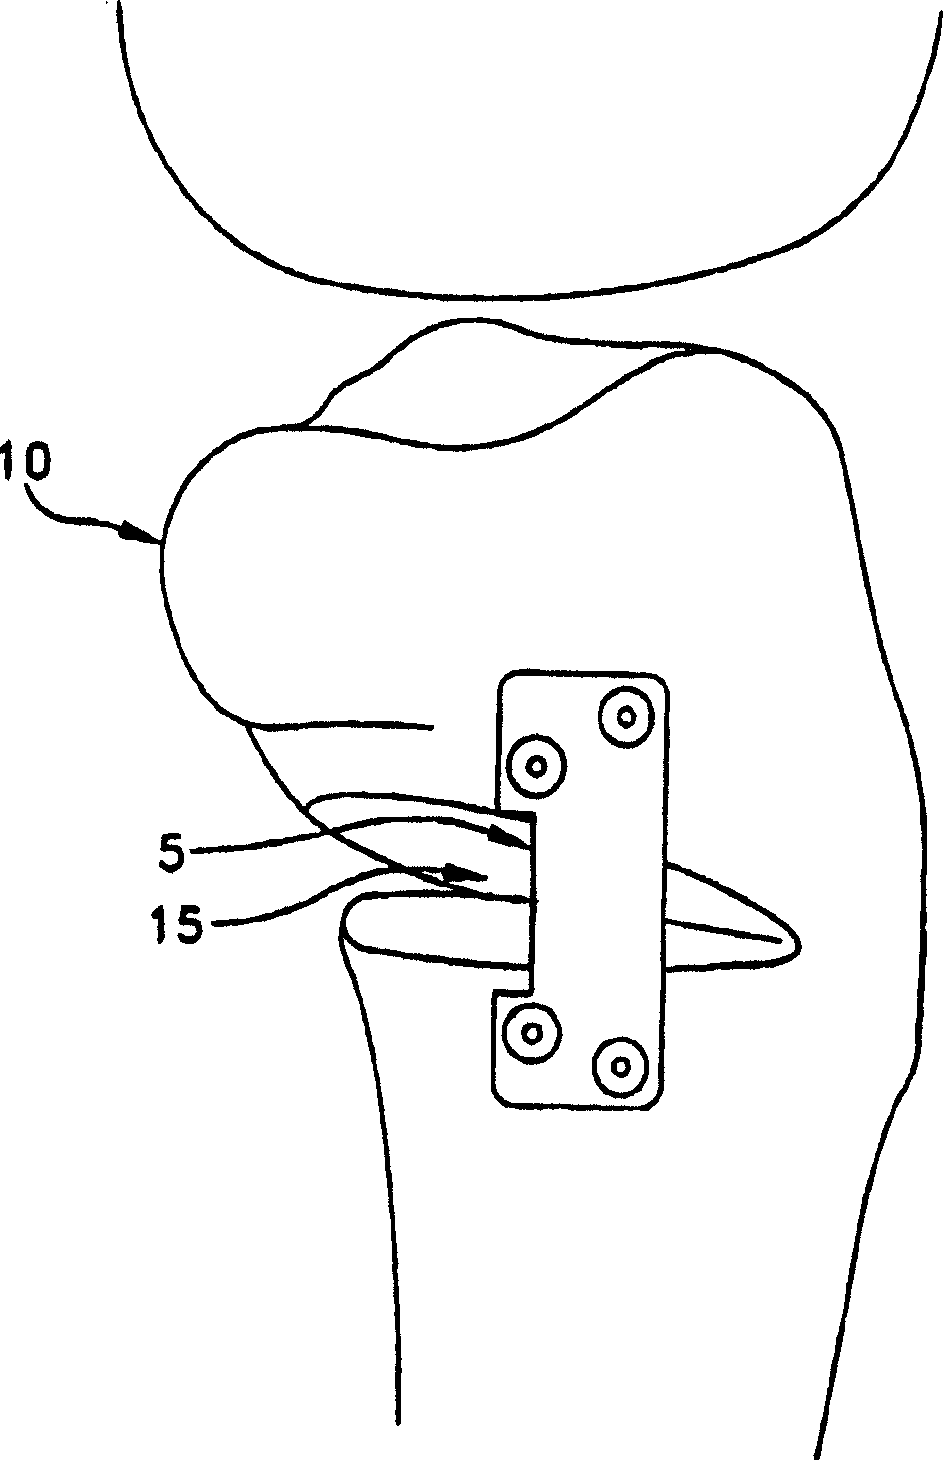 Open wedge osteotomy system and surgical method